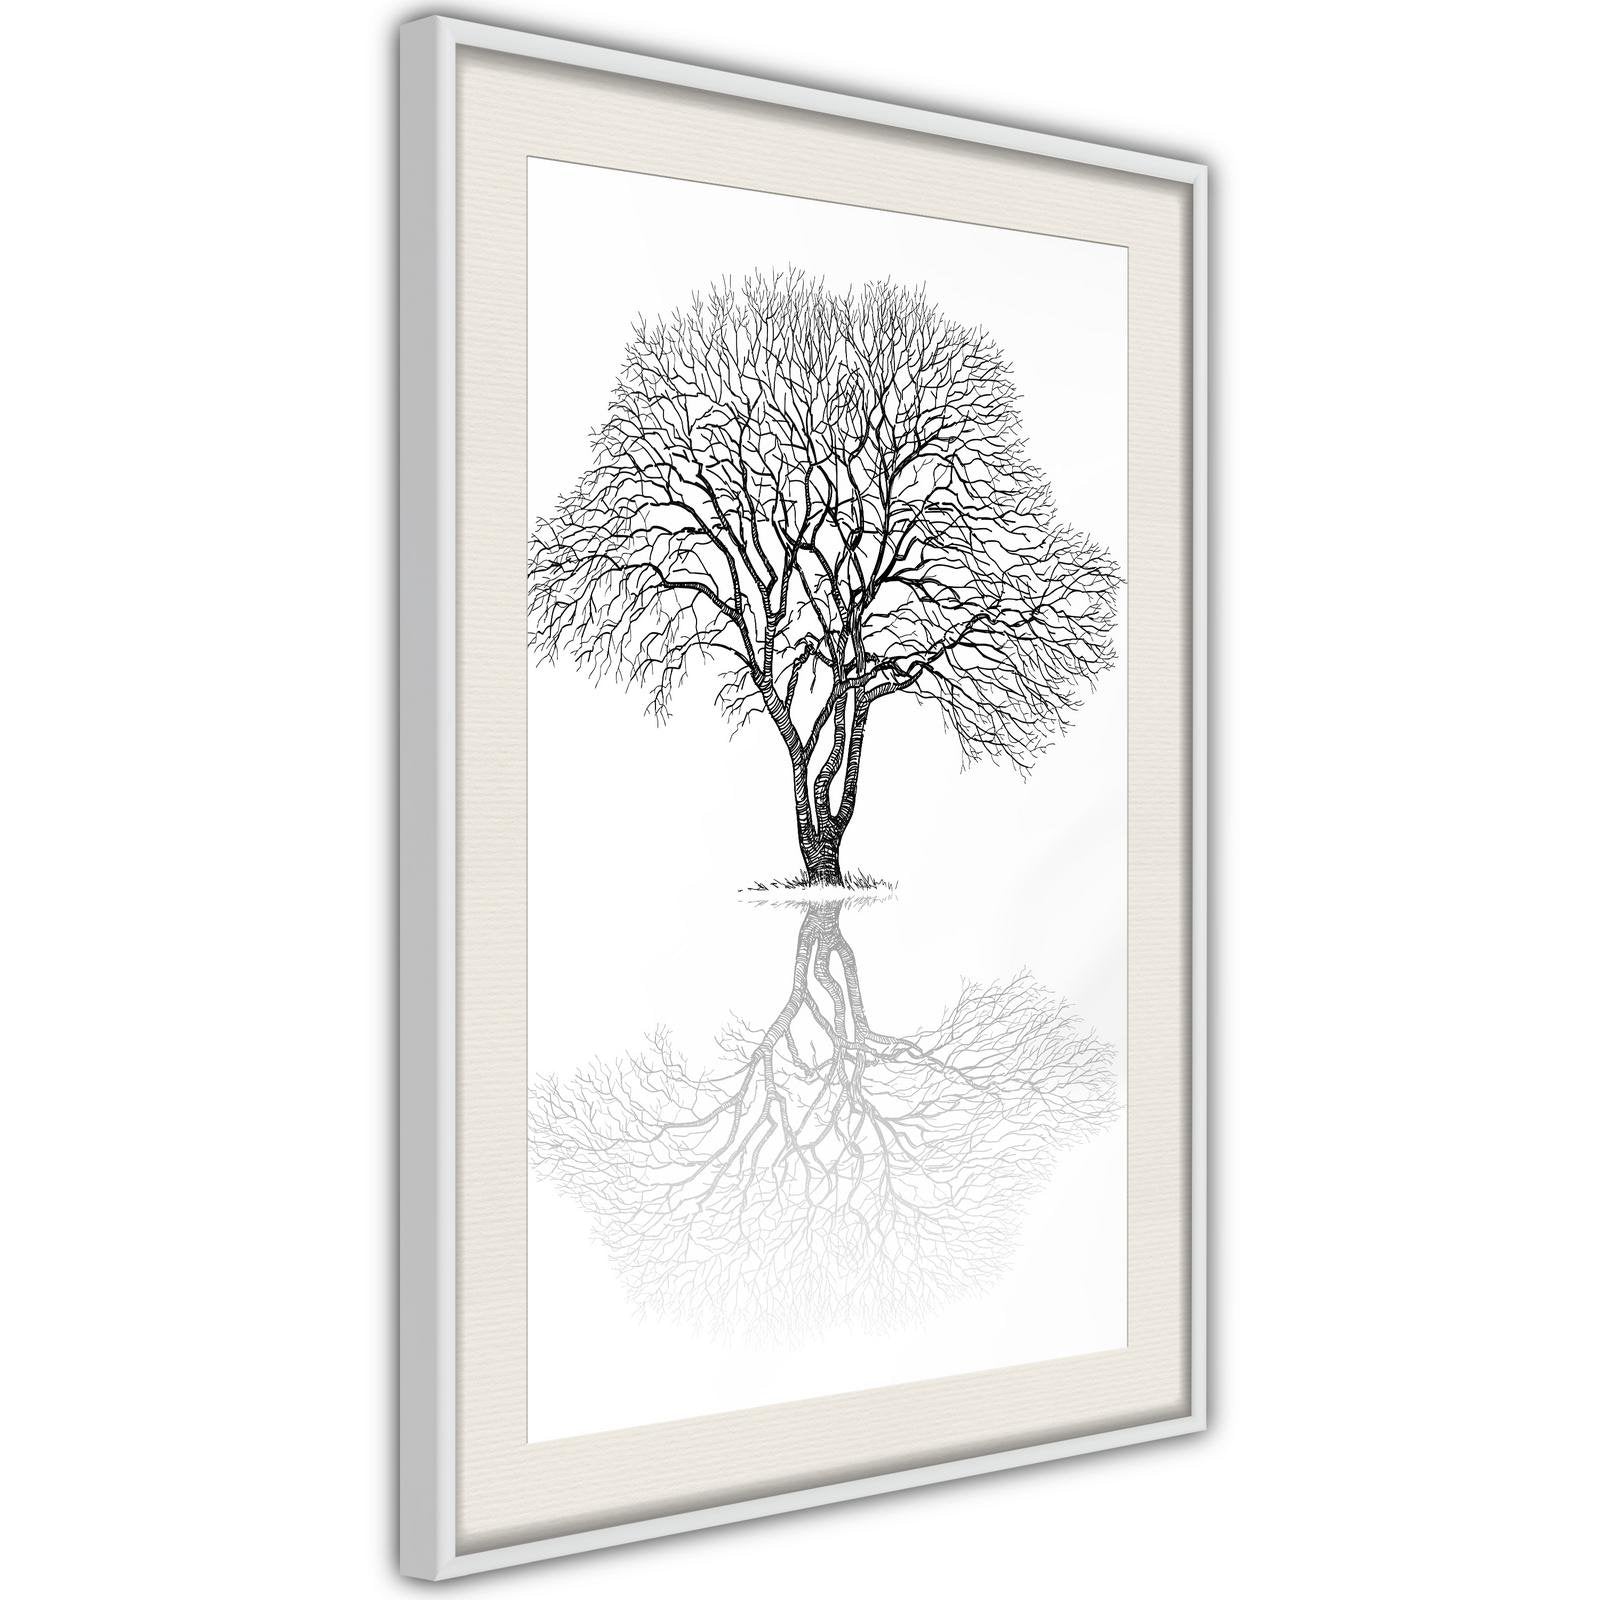 Inramad Poster / Tavla - Roots or Treetop?-Poster Inramad-Artgeist-peaceofhome.se